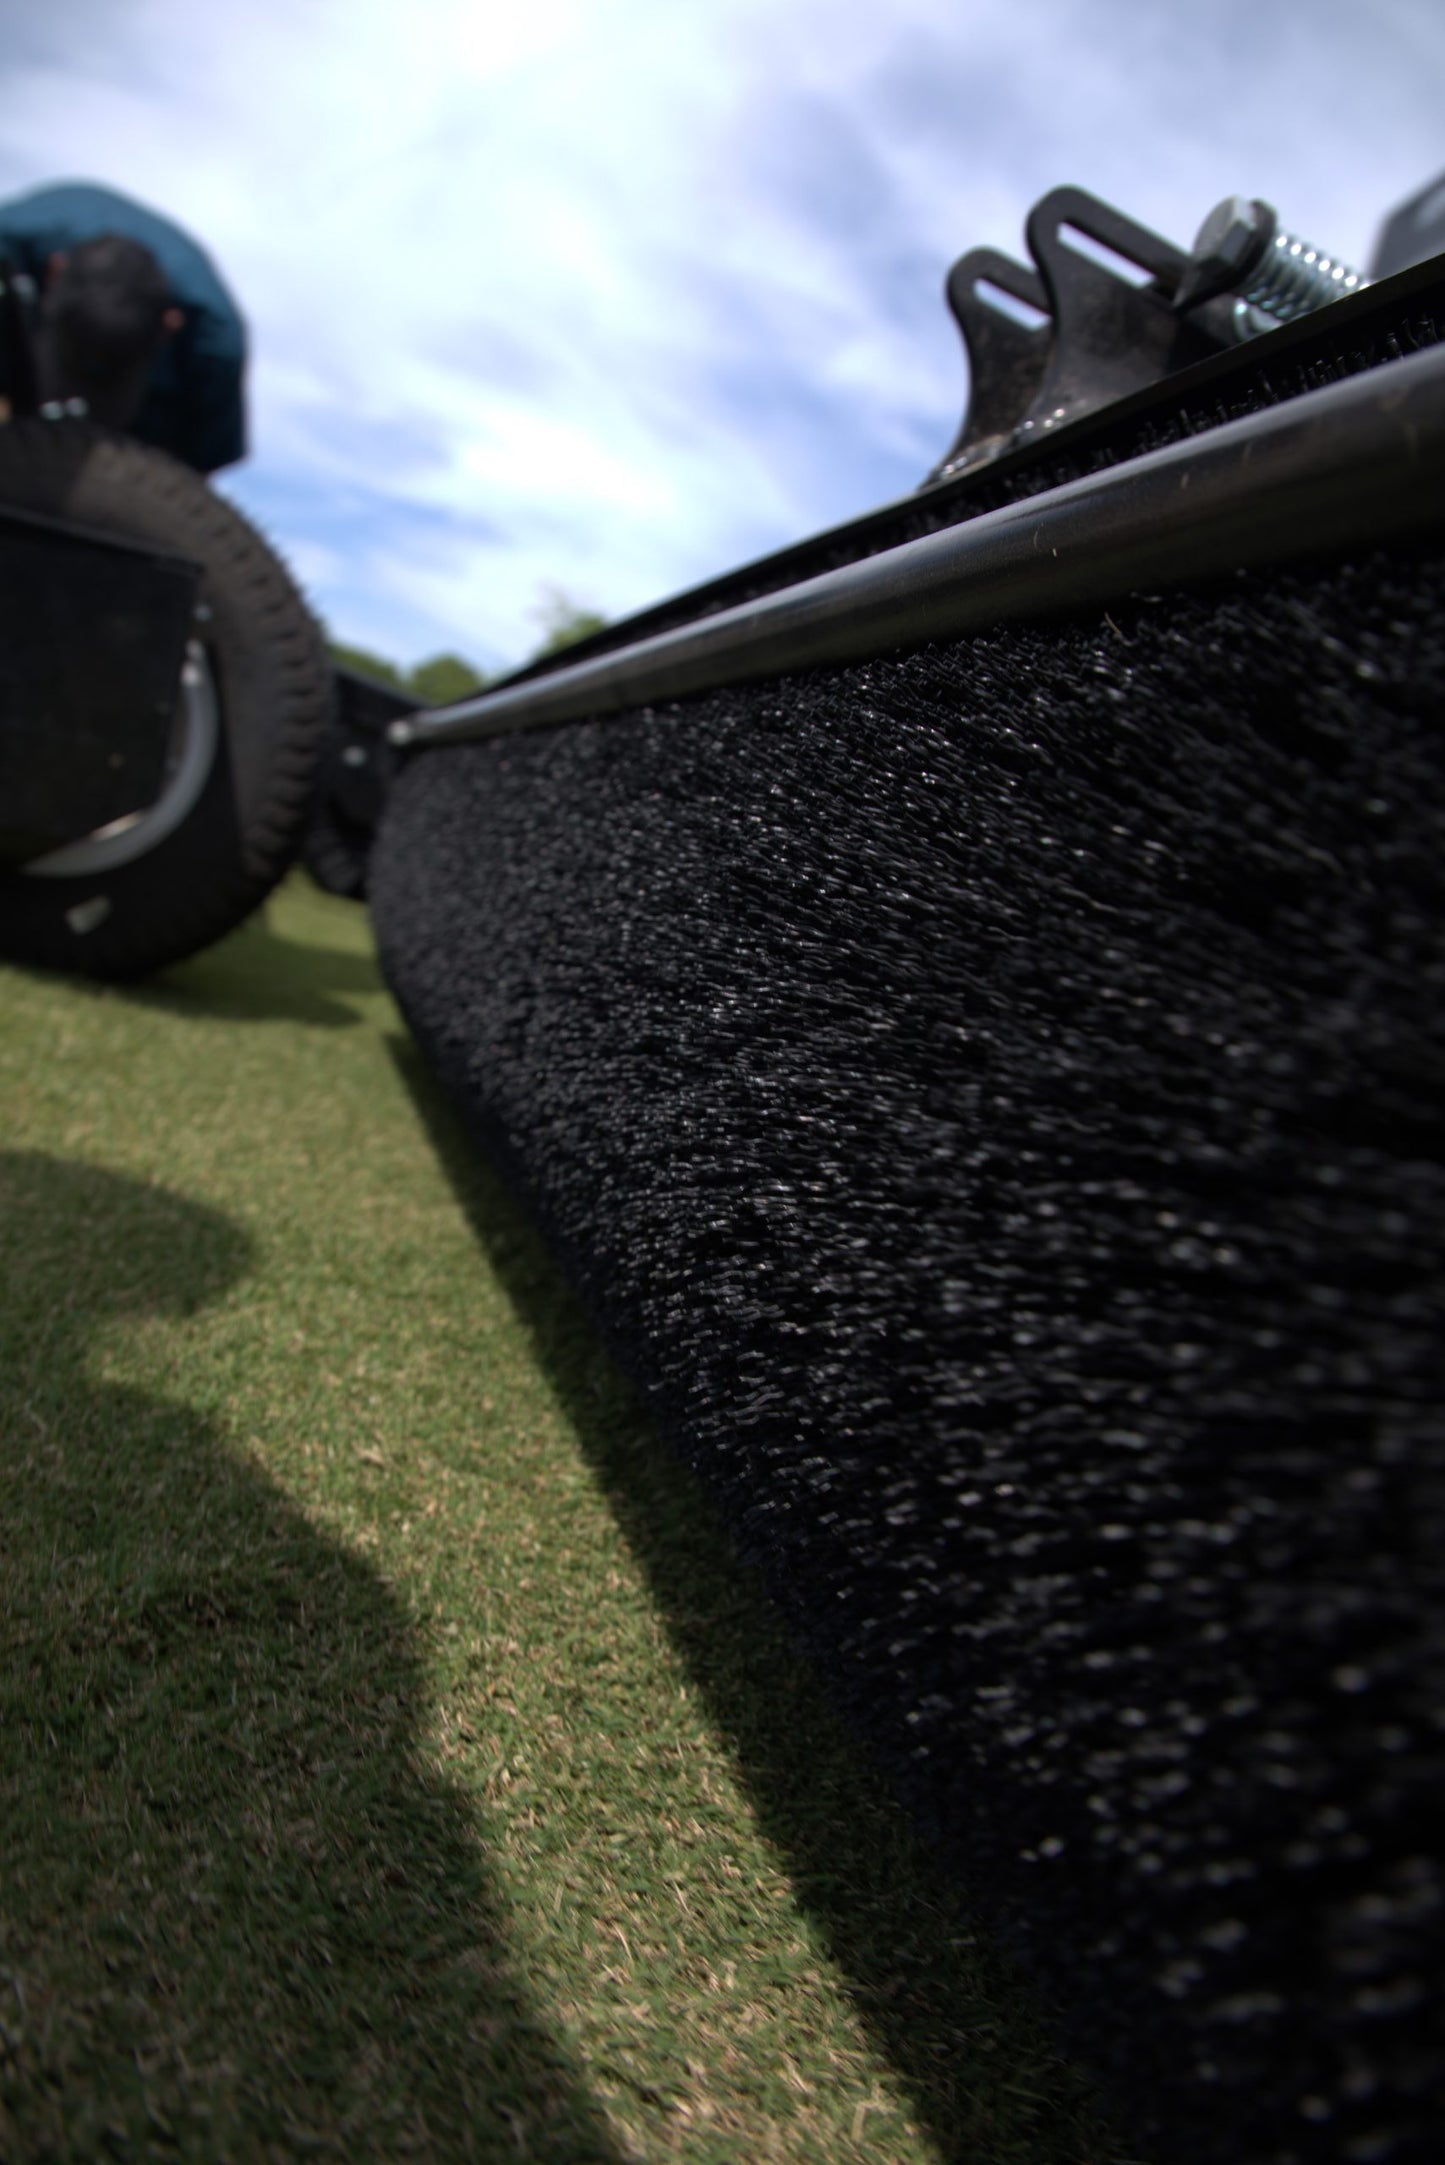 STEC 182" FB3 FAIRWAY BRUSH WITH REMOVABLE DRAG BRUSH SYSTEM